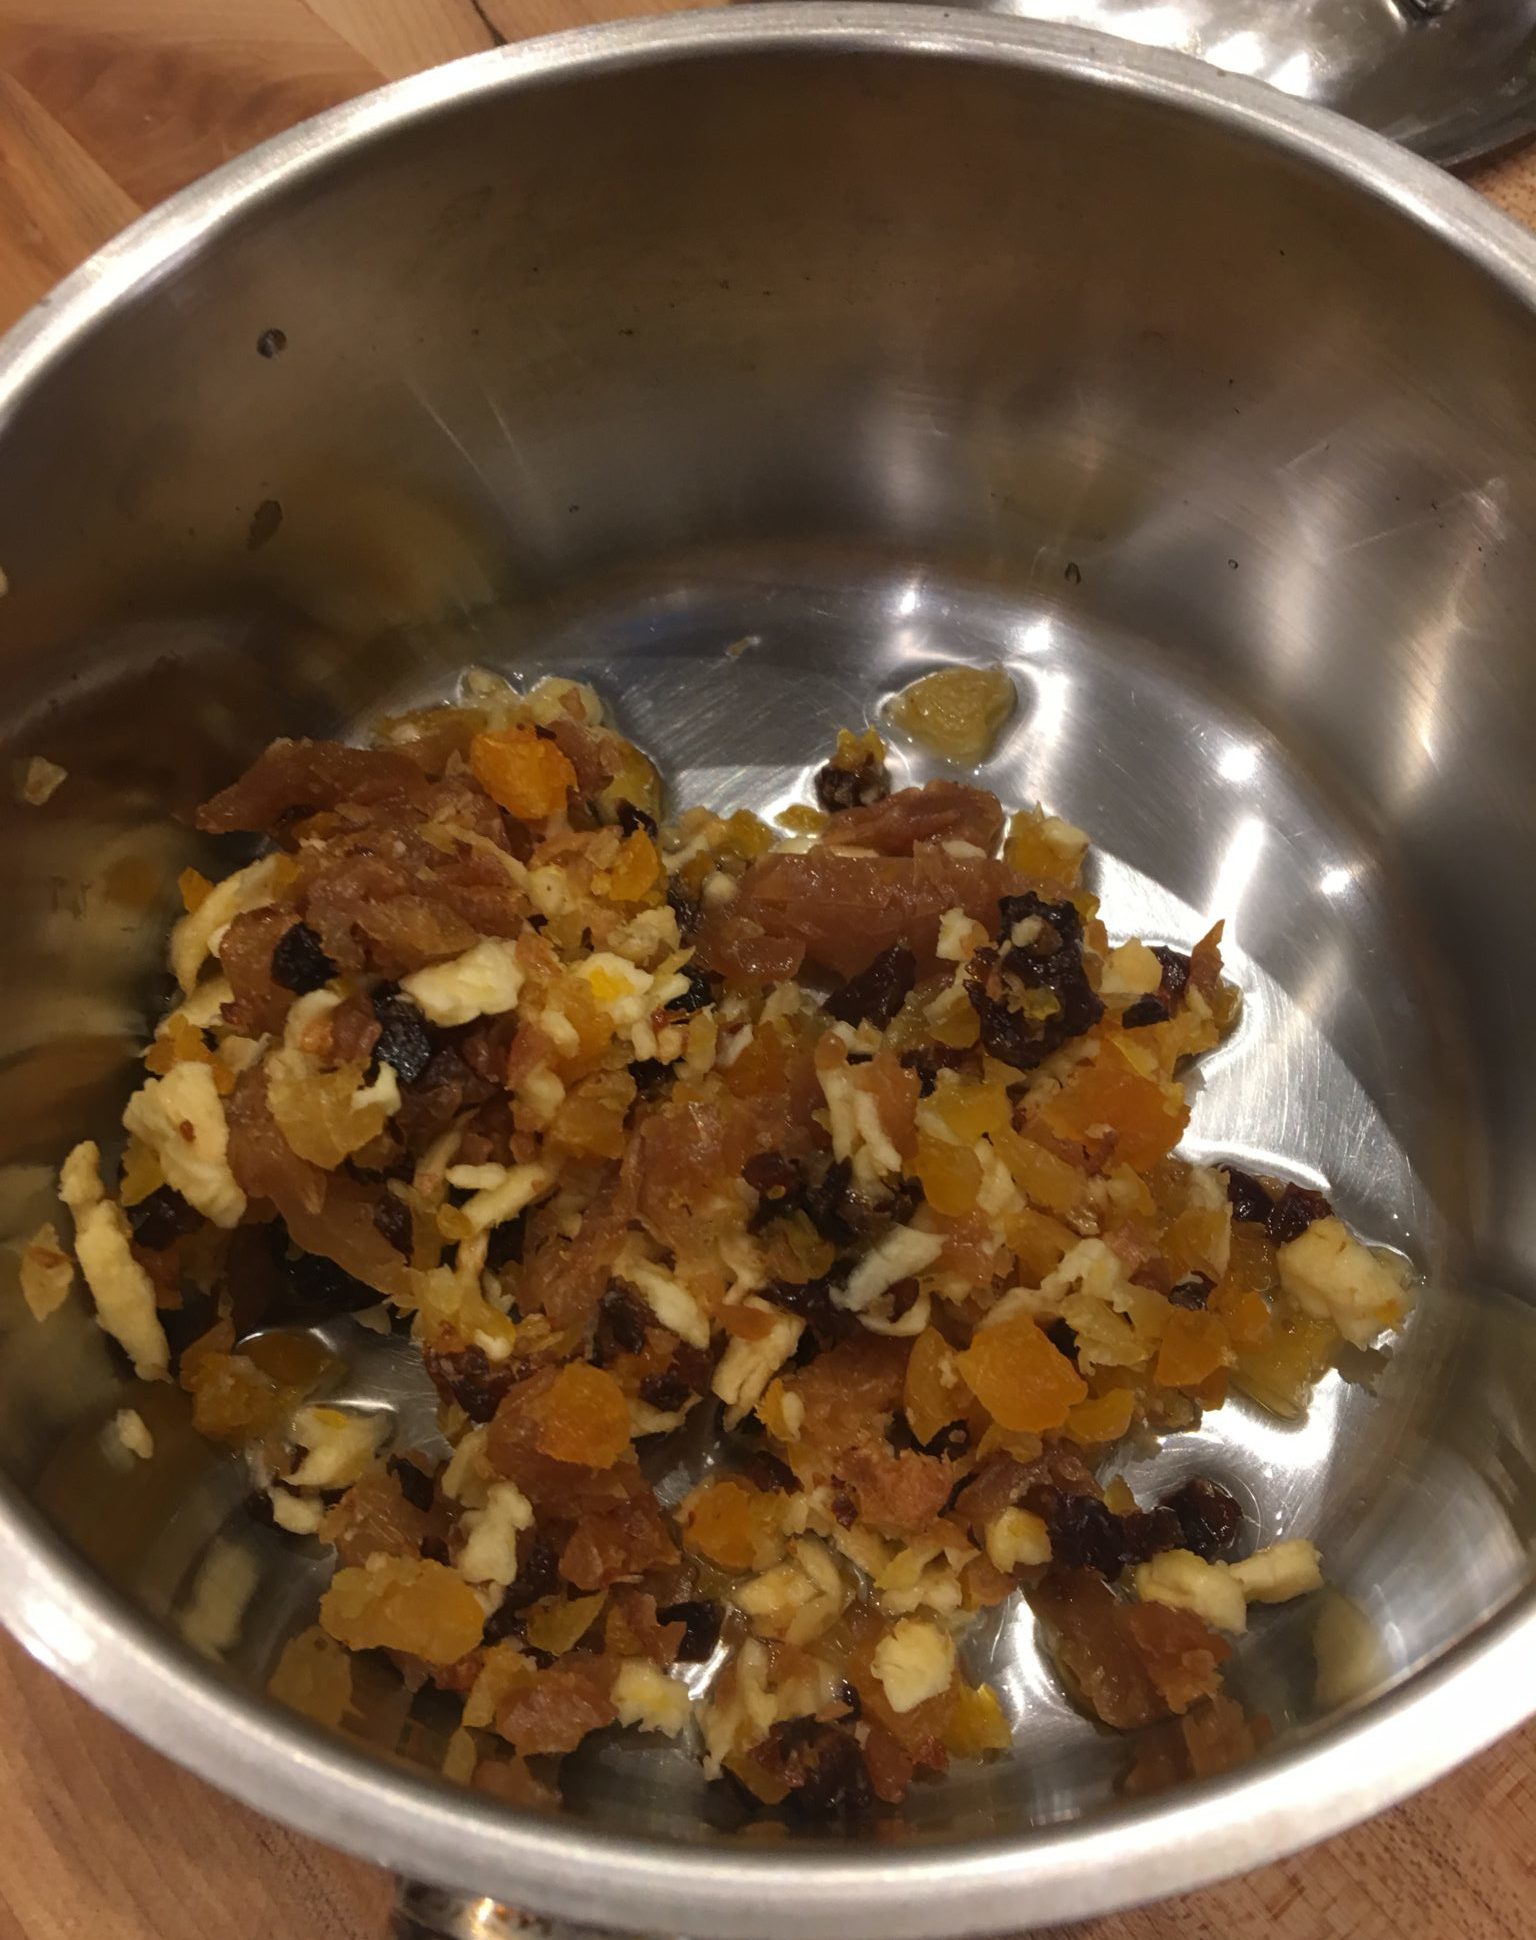 Dried fruit, steamed